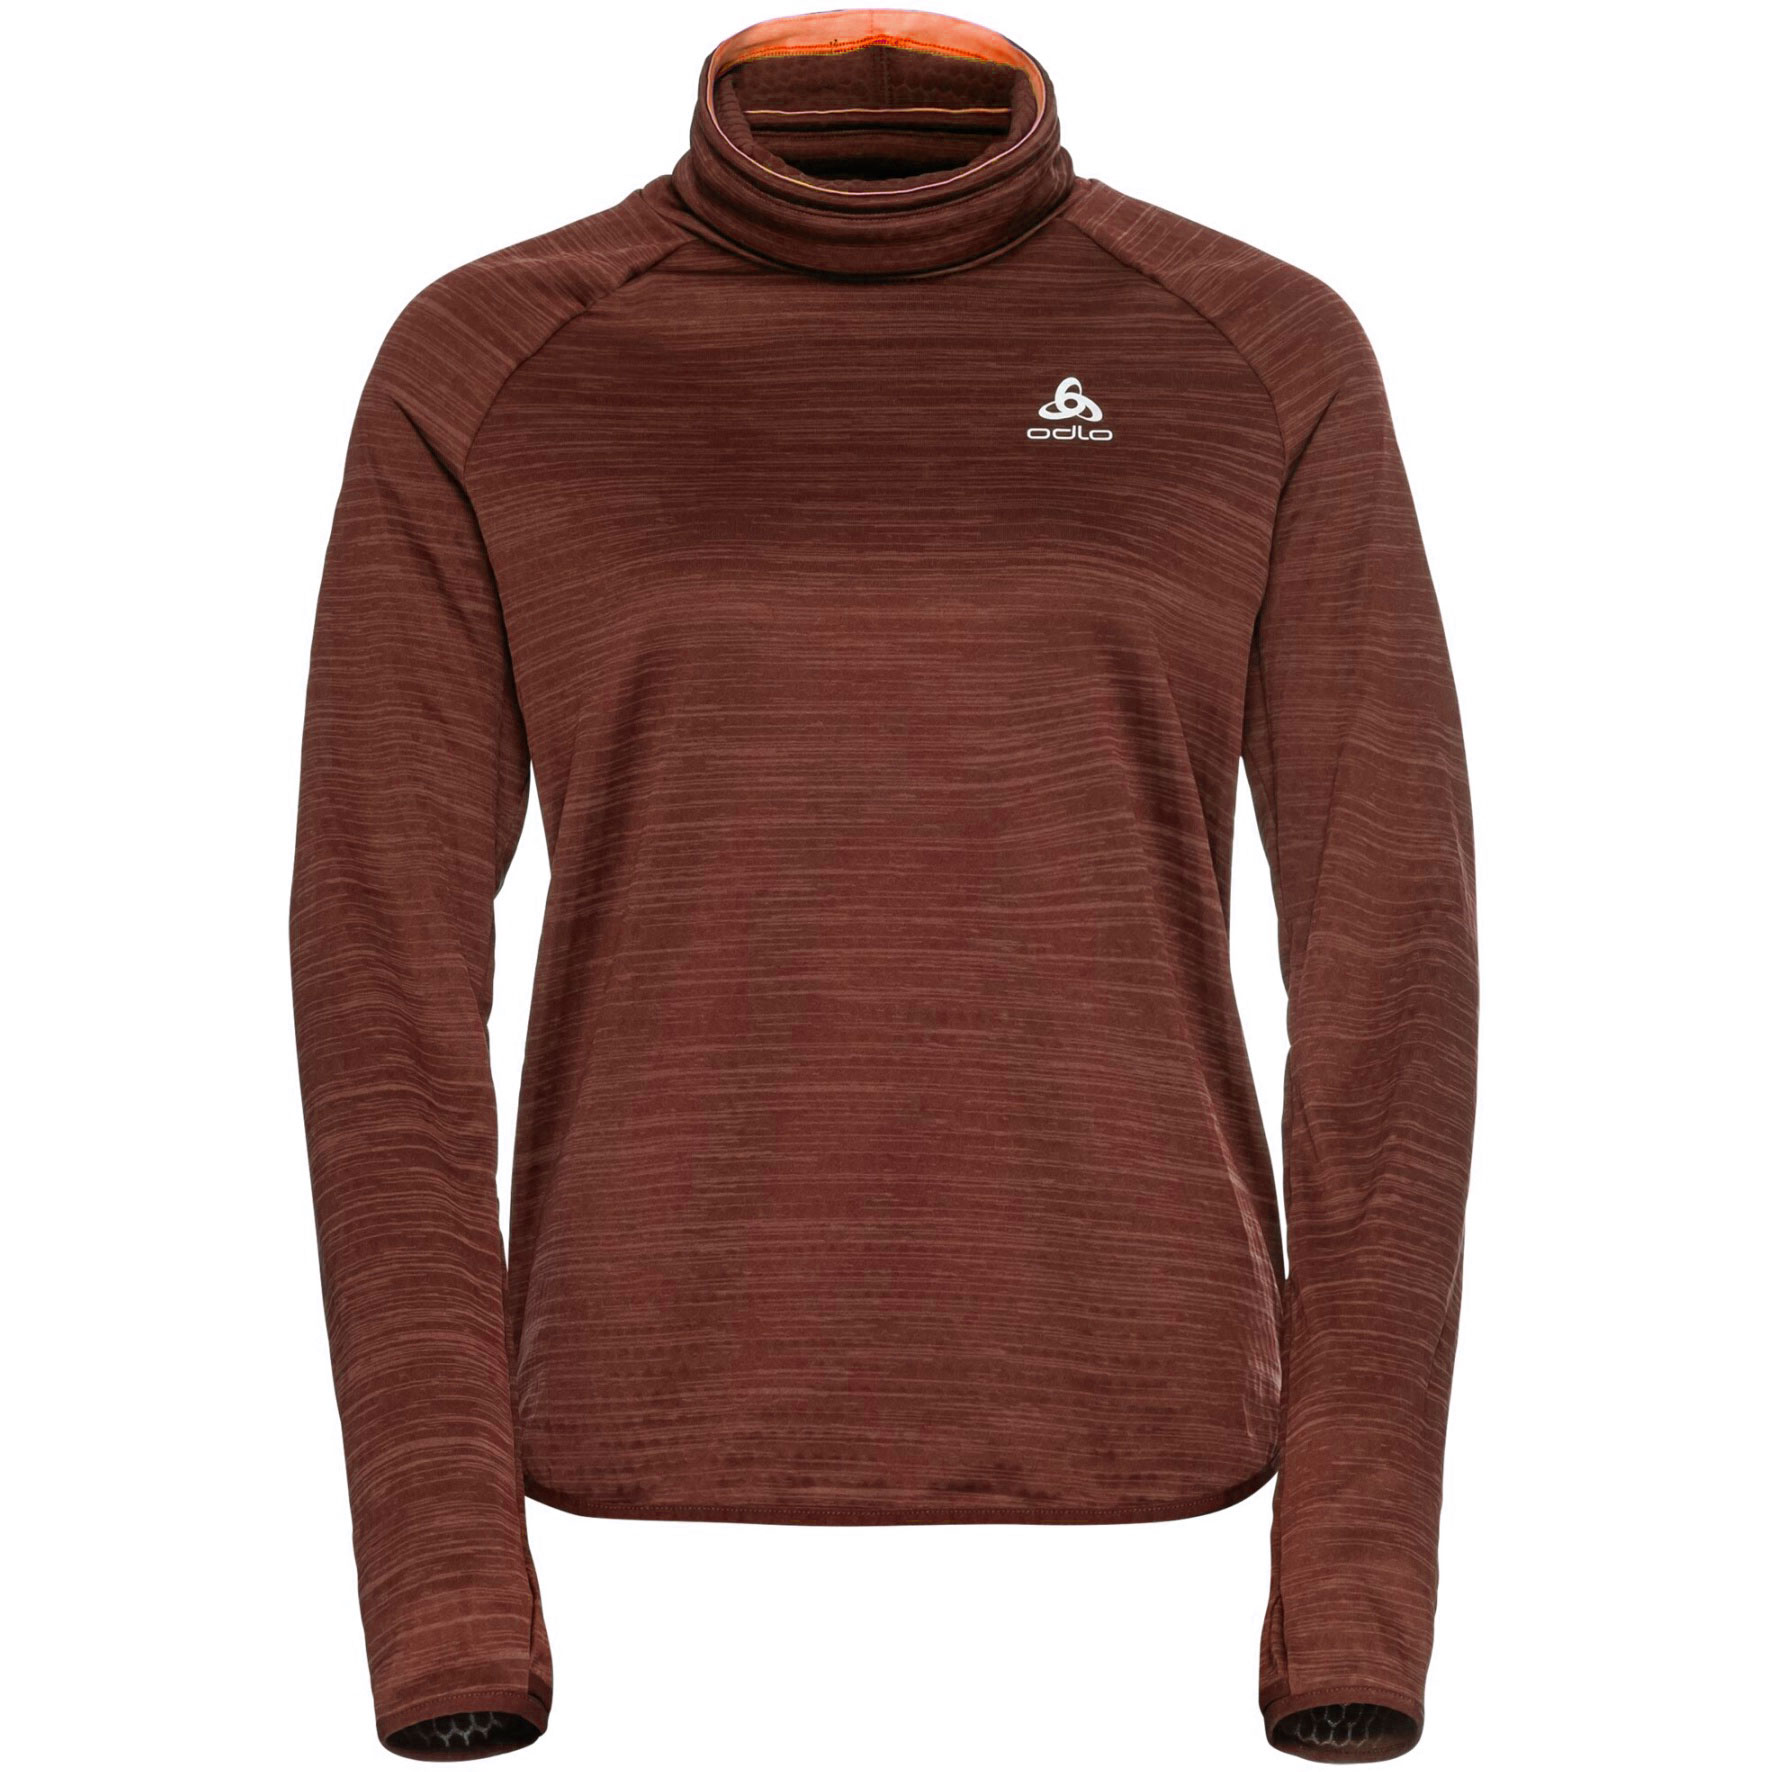 Picture of Odlo Run Easy Warm Mid Layer Top Women - spiced apple melange